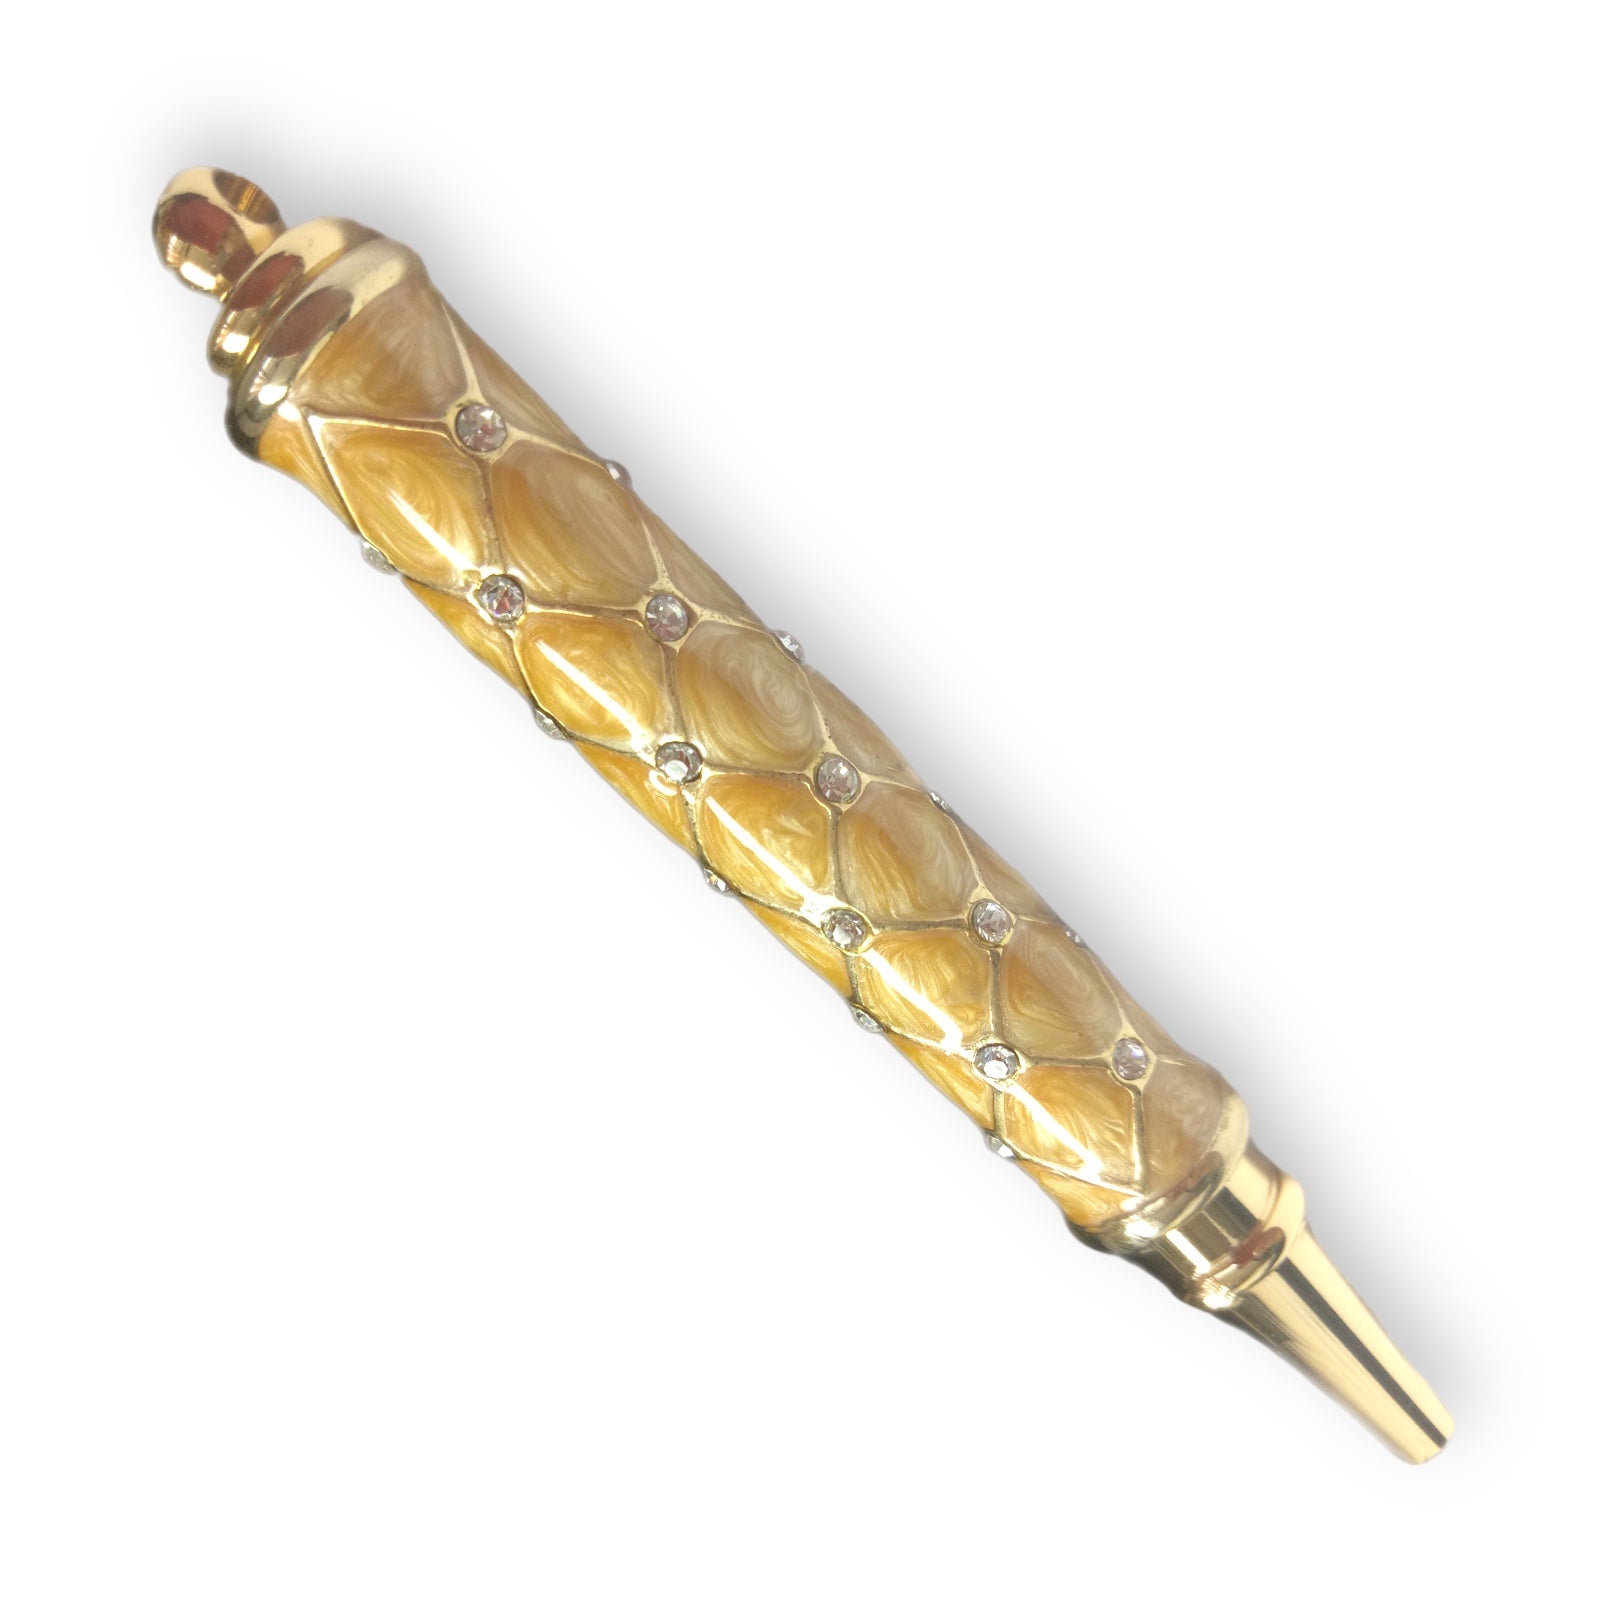 Luxury Gold Handcrafted Writing Pen With Artistic Stones Enamel